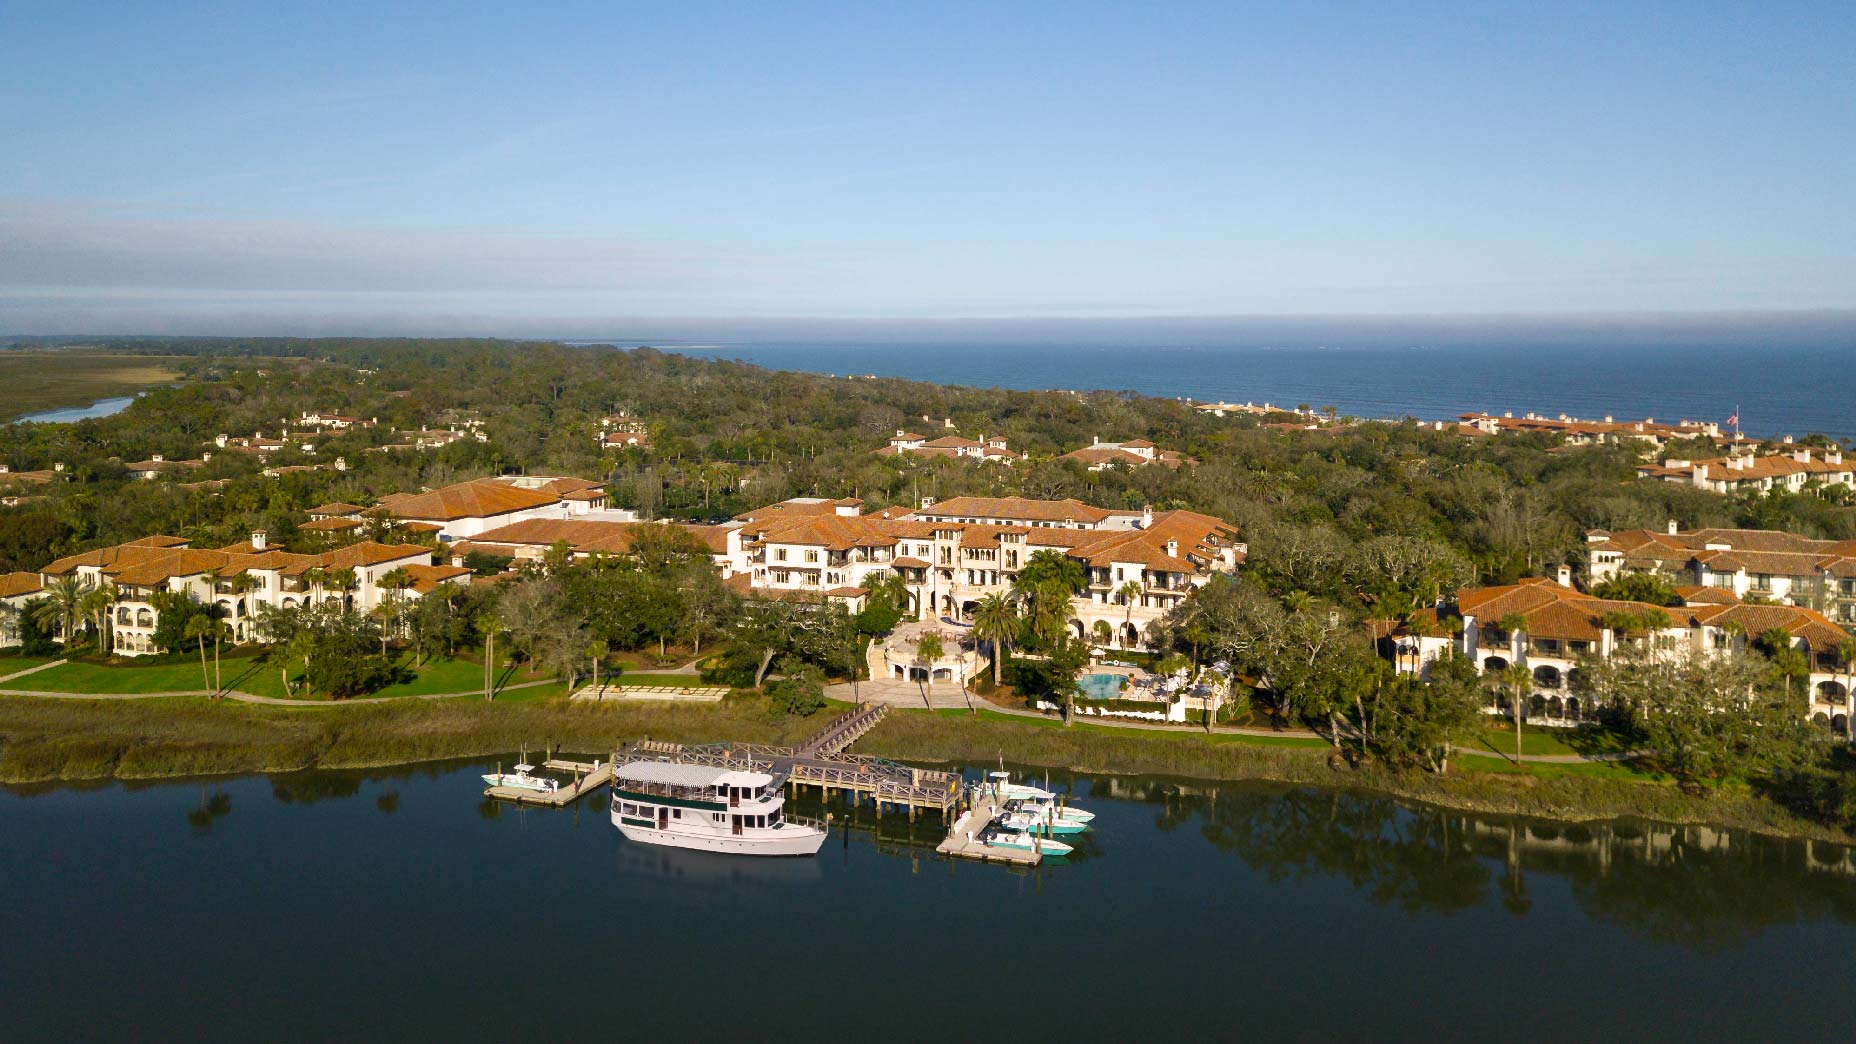 An aerial view of Sea Island Resort